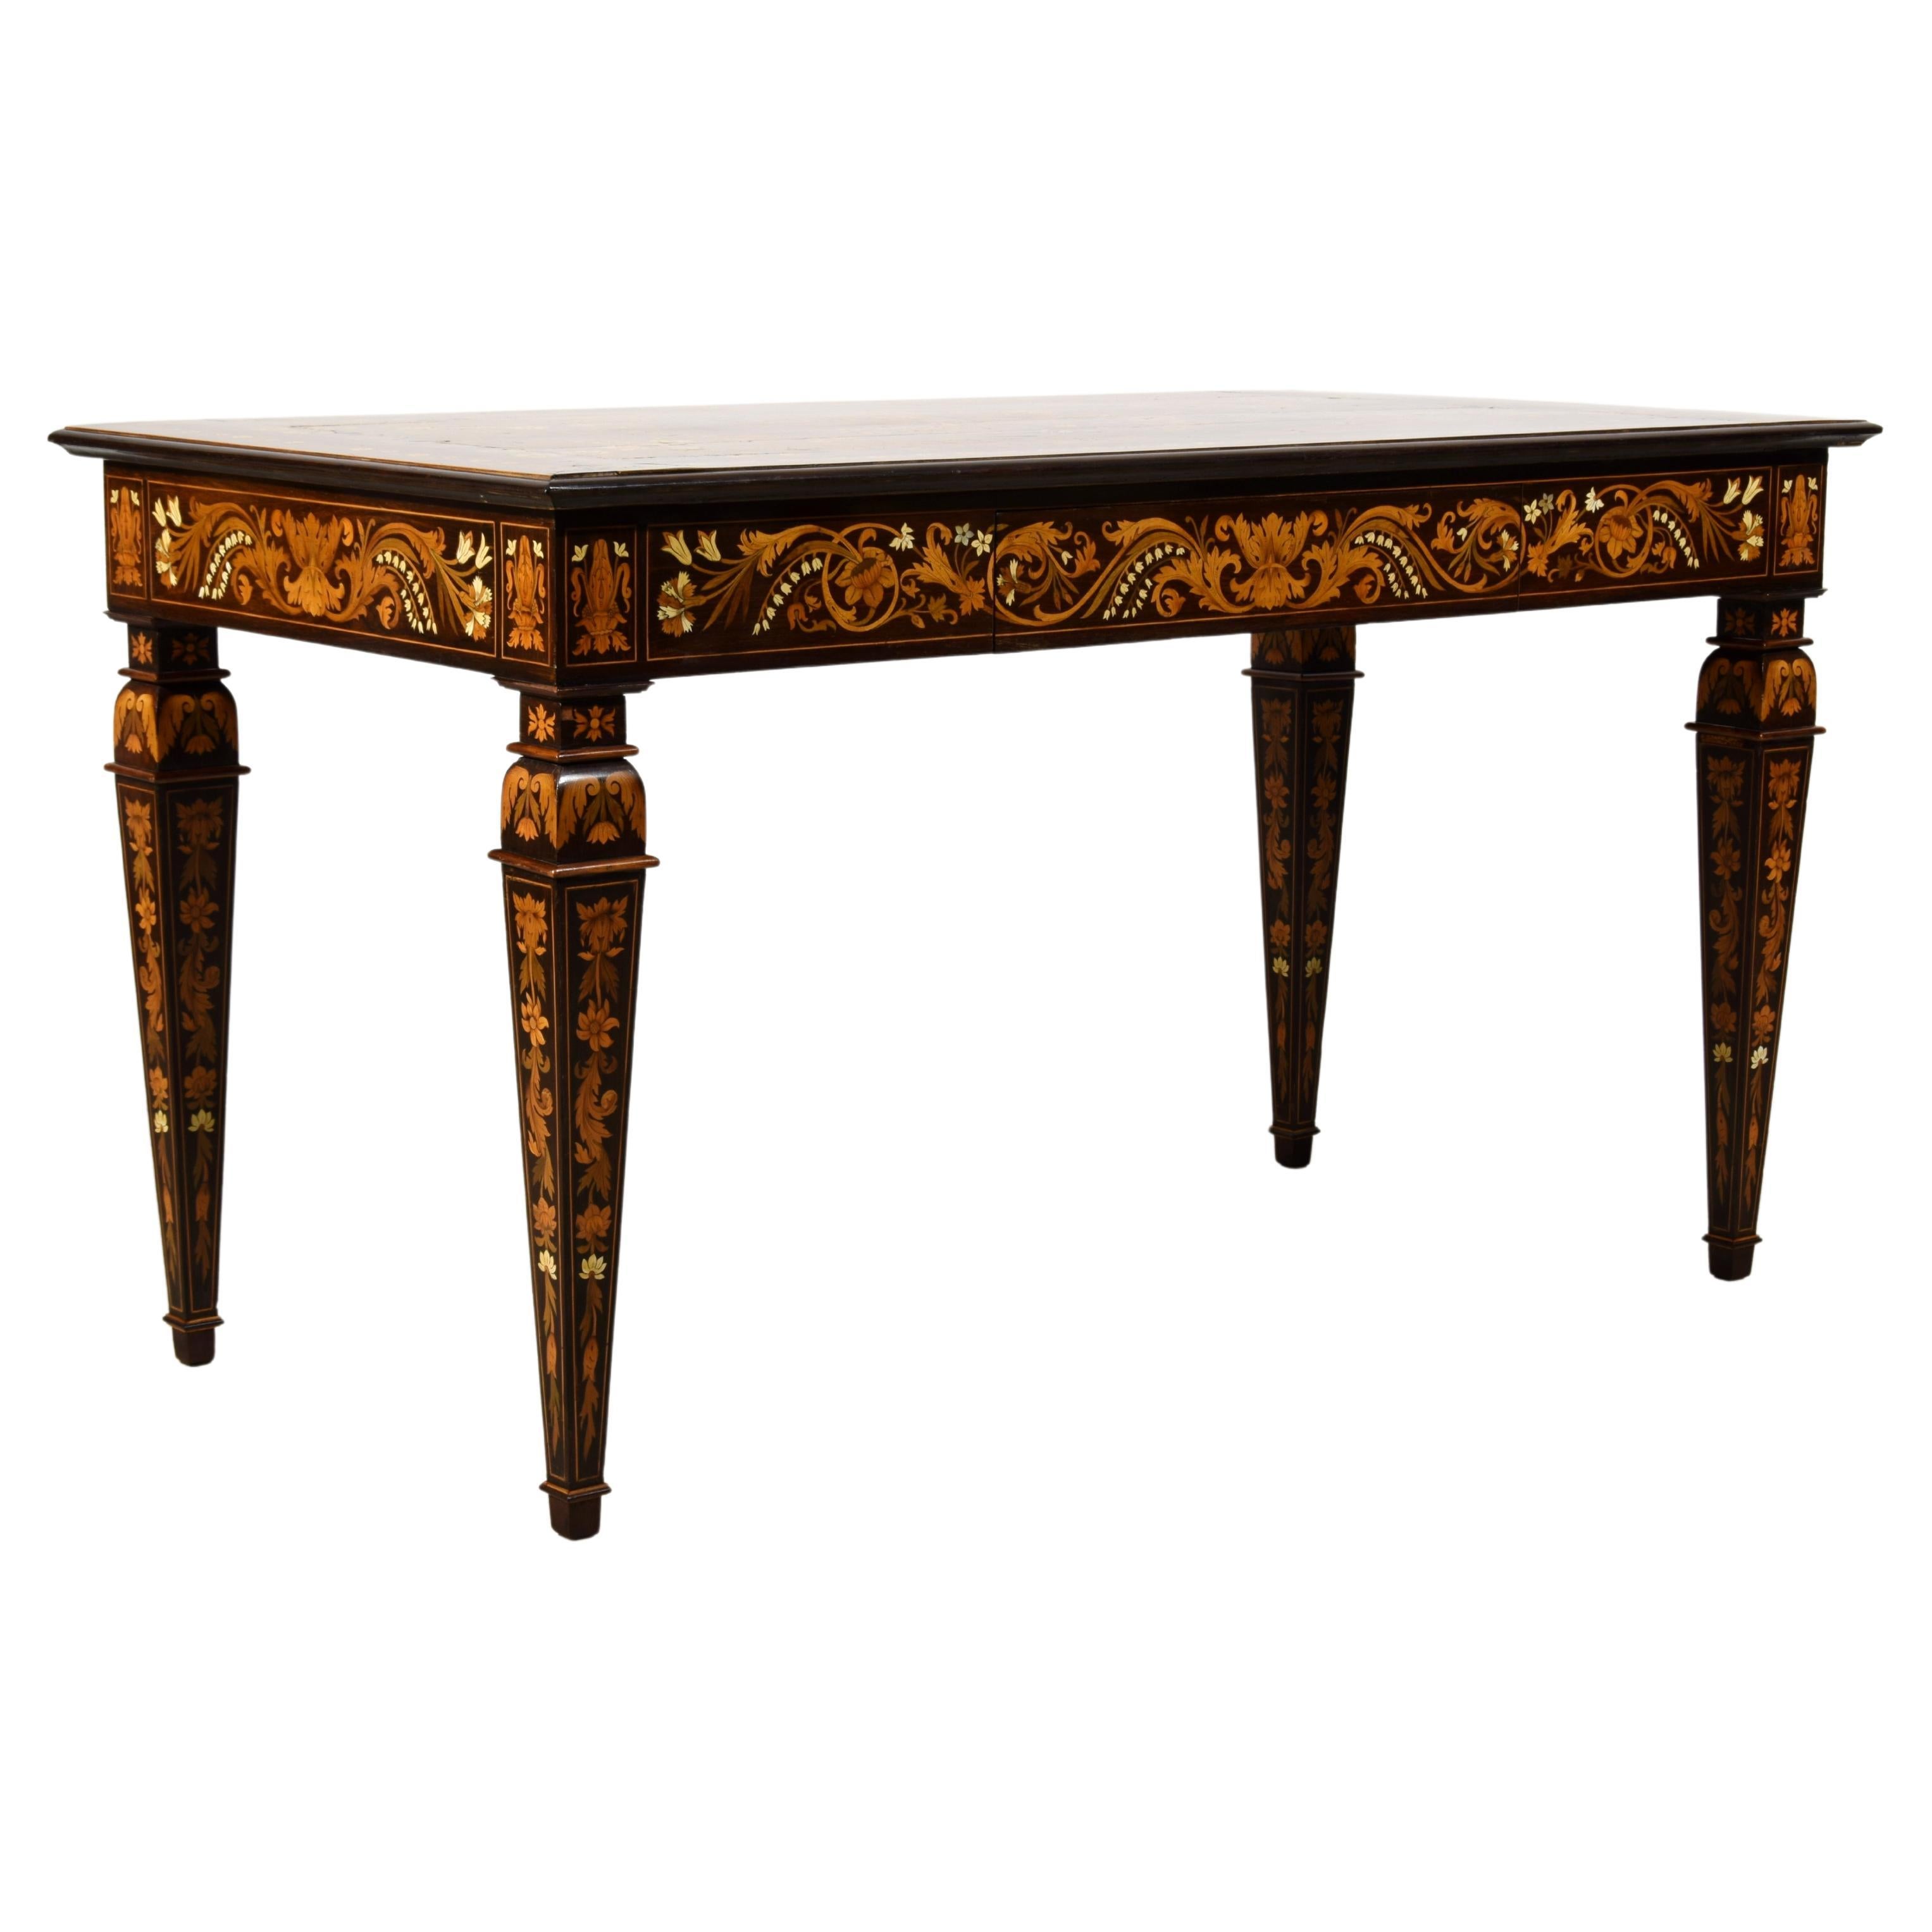 19th Century, Italian Inlaid Wood Centre Table by Luigi and Angiolo Falcini For Sale